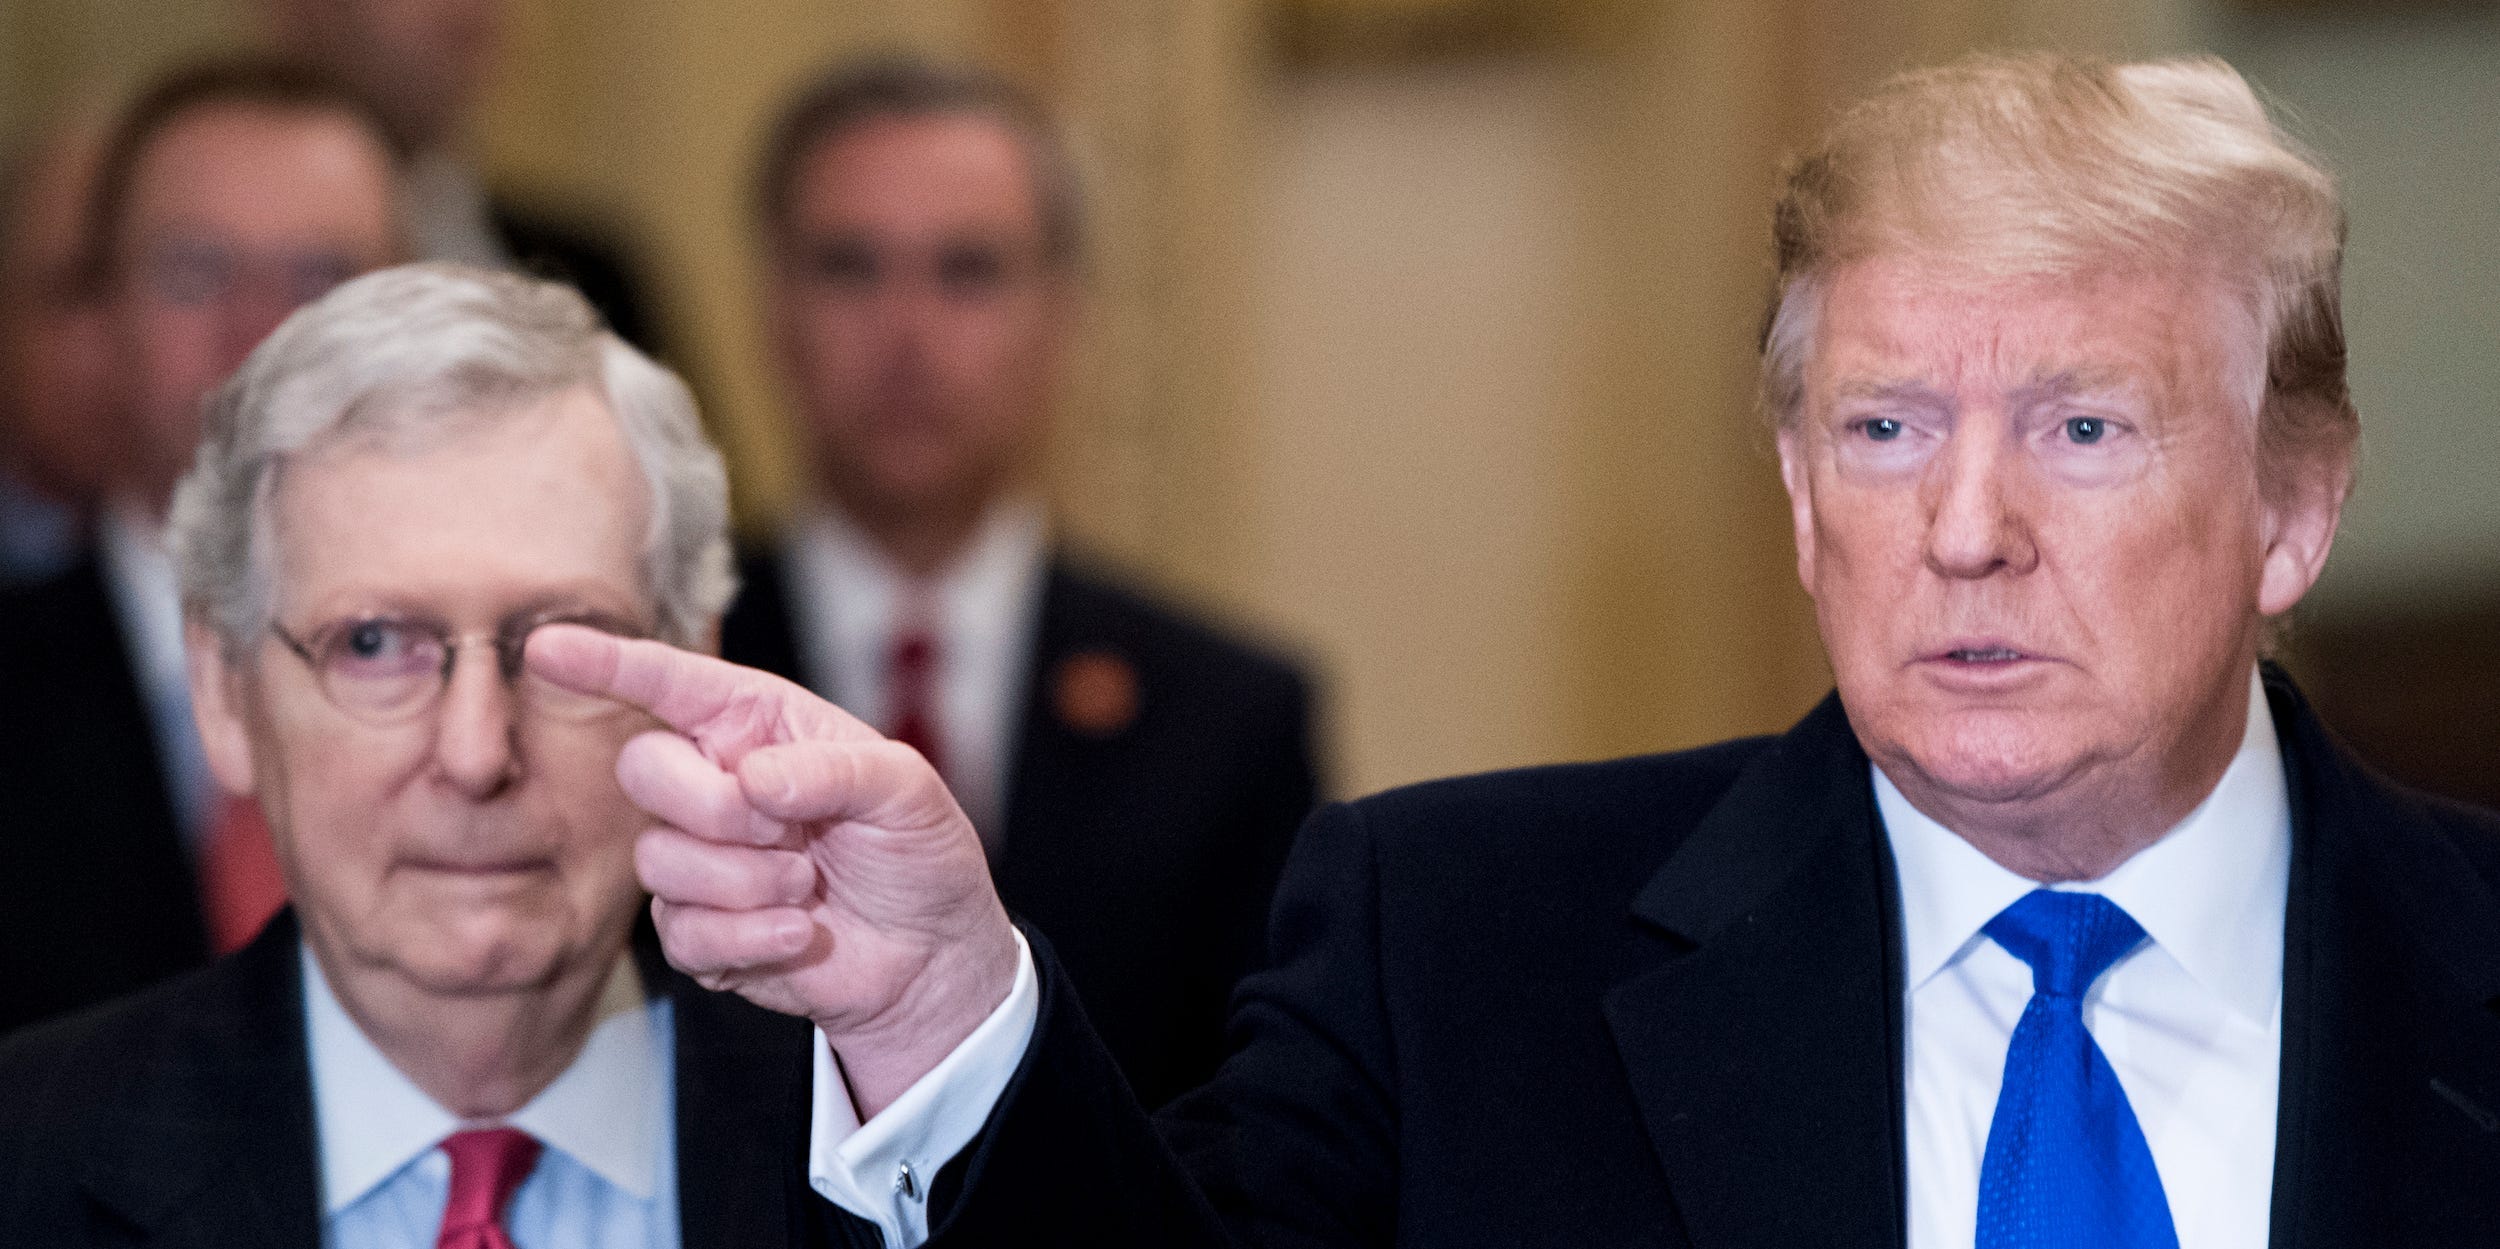 President Donald Trump takes questions from reporters he arrives with Senate Majority Leader Mitch McConnell, R-Ky., for the Senate Republicans' lunch in the Capitol on Tuesday, March 26, 2019.